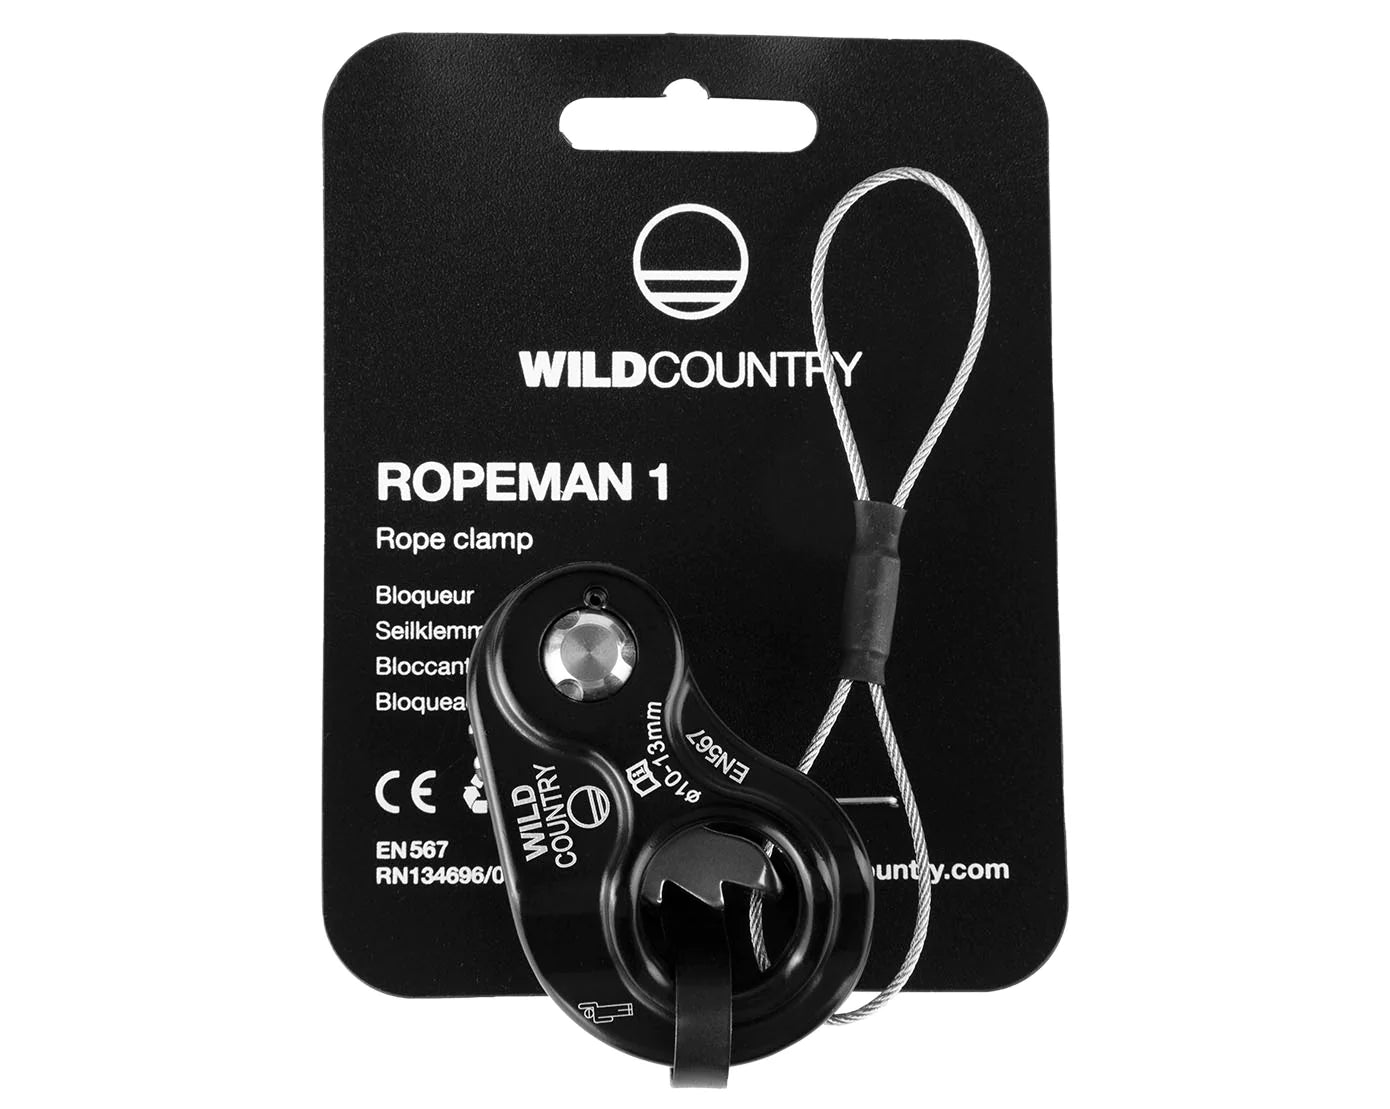 wild country rope man 1 trophyline branded back